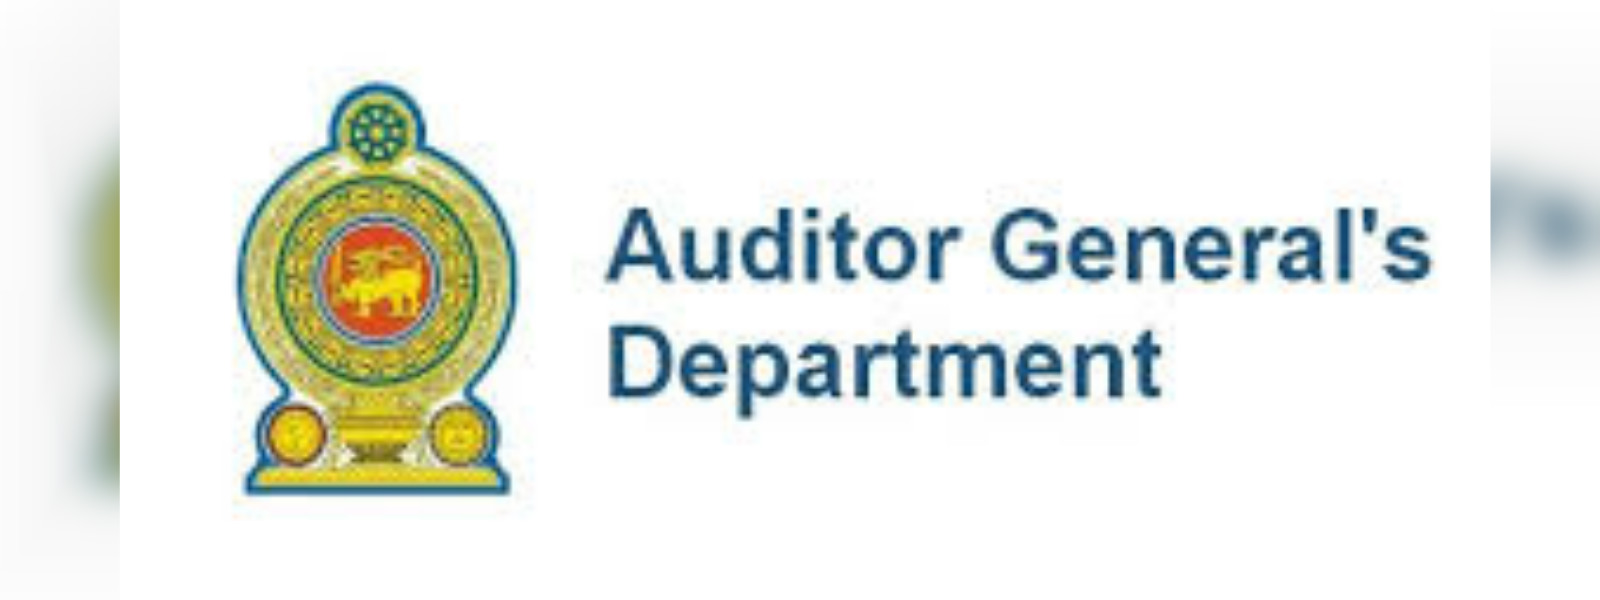 Auditor General's department to be abolished